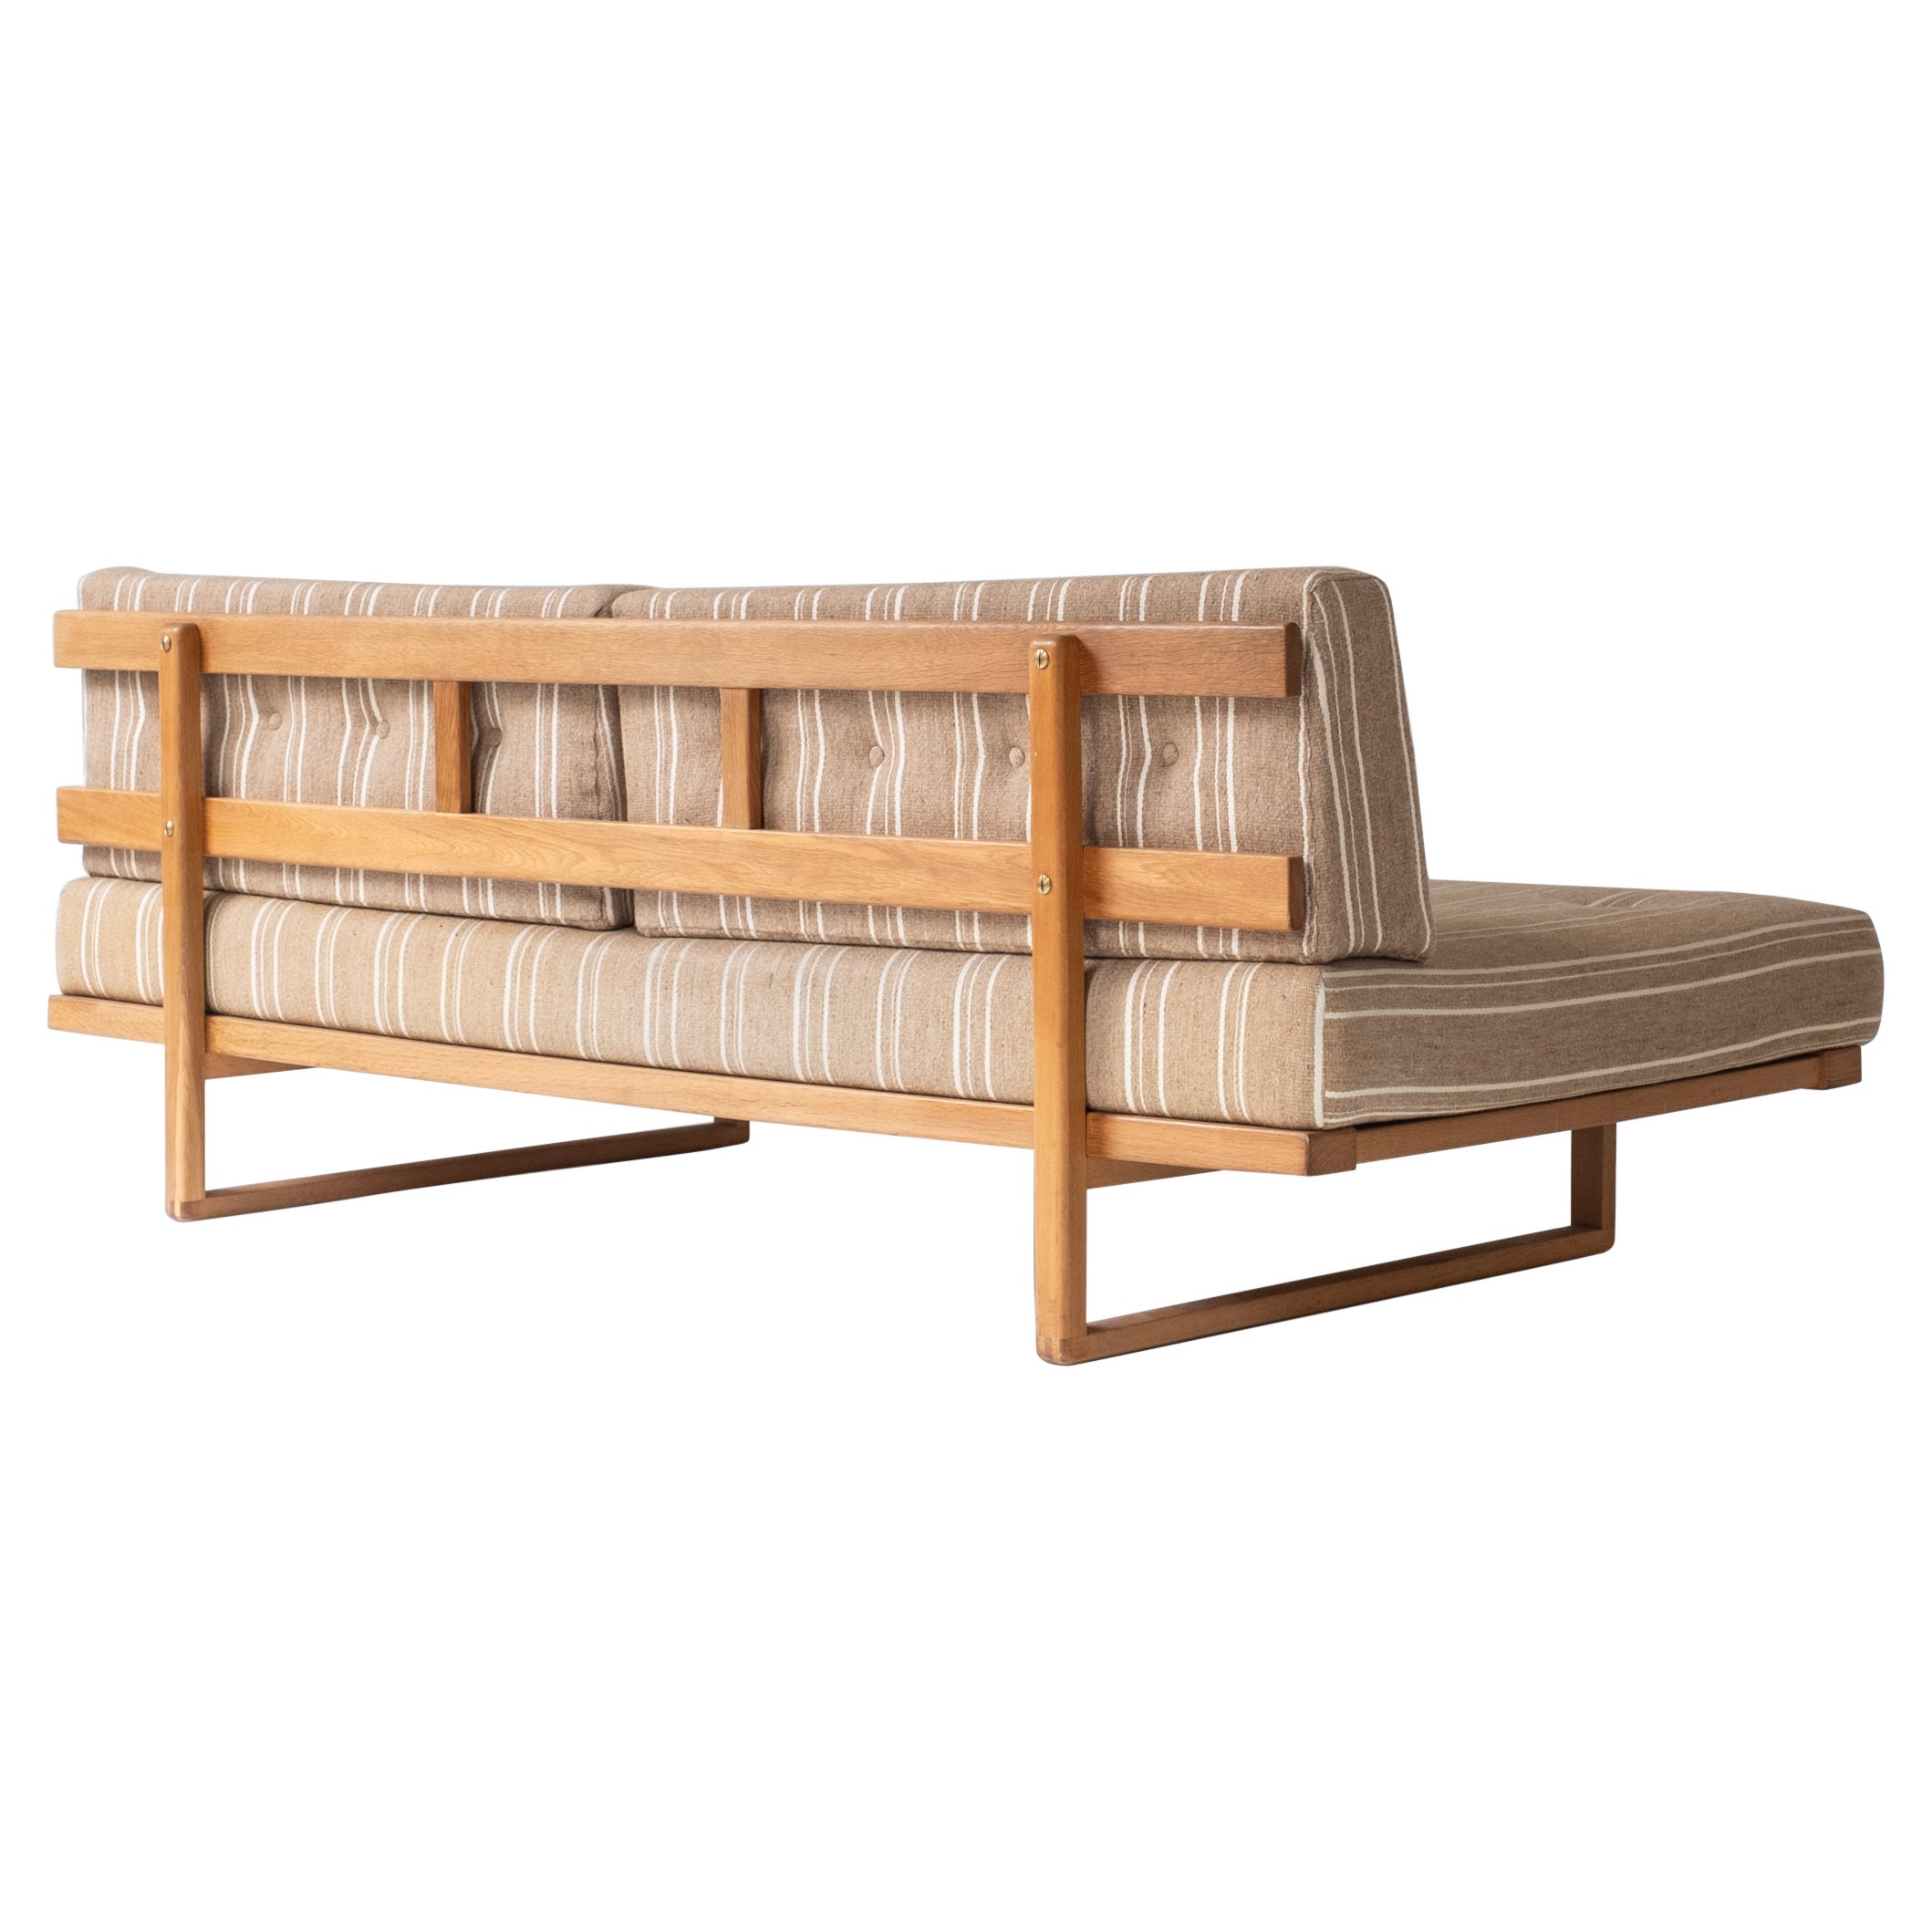 Sofa or daybed ‘Model No 4311’ by Børge Mogensen for Fredericia, Denmark 1950s.